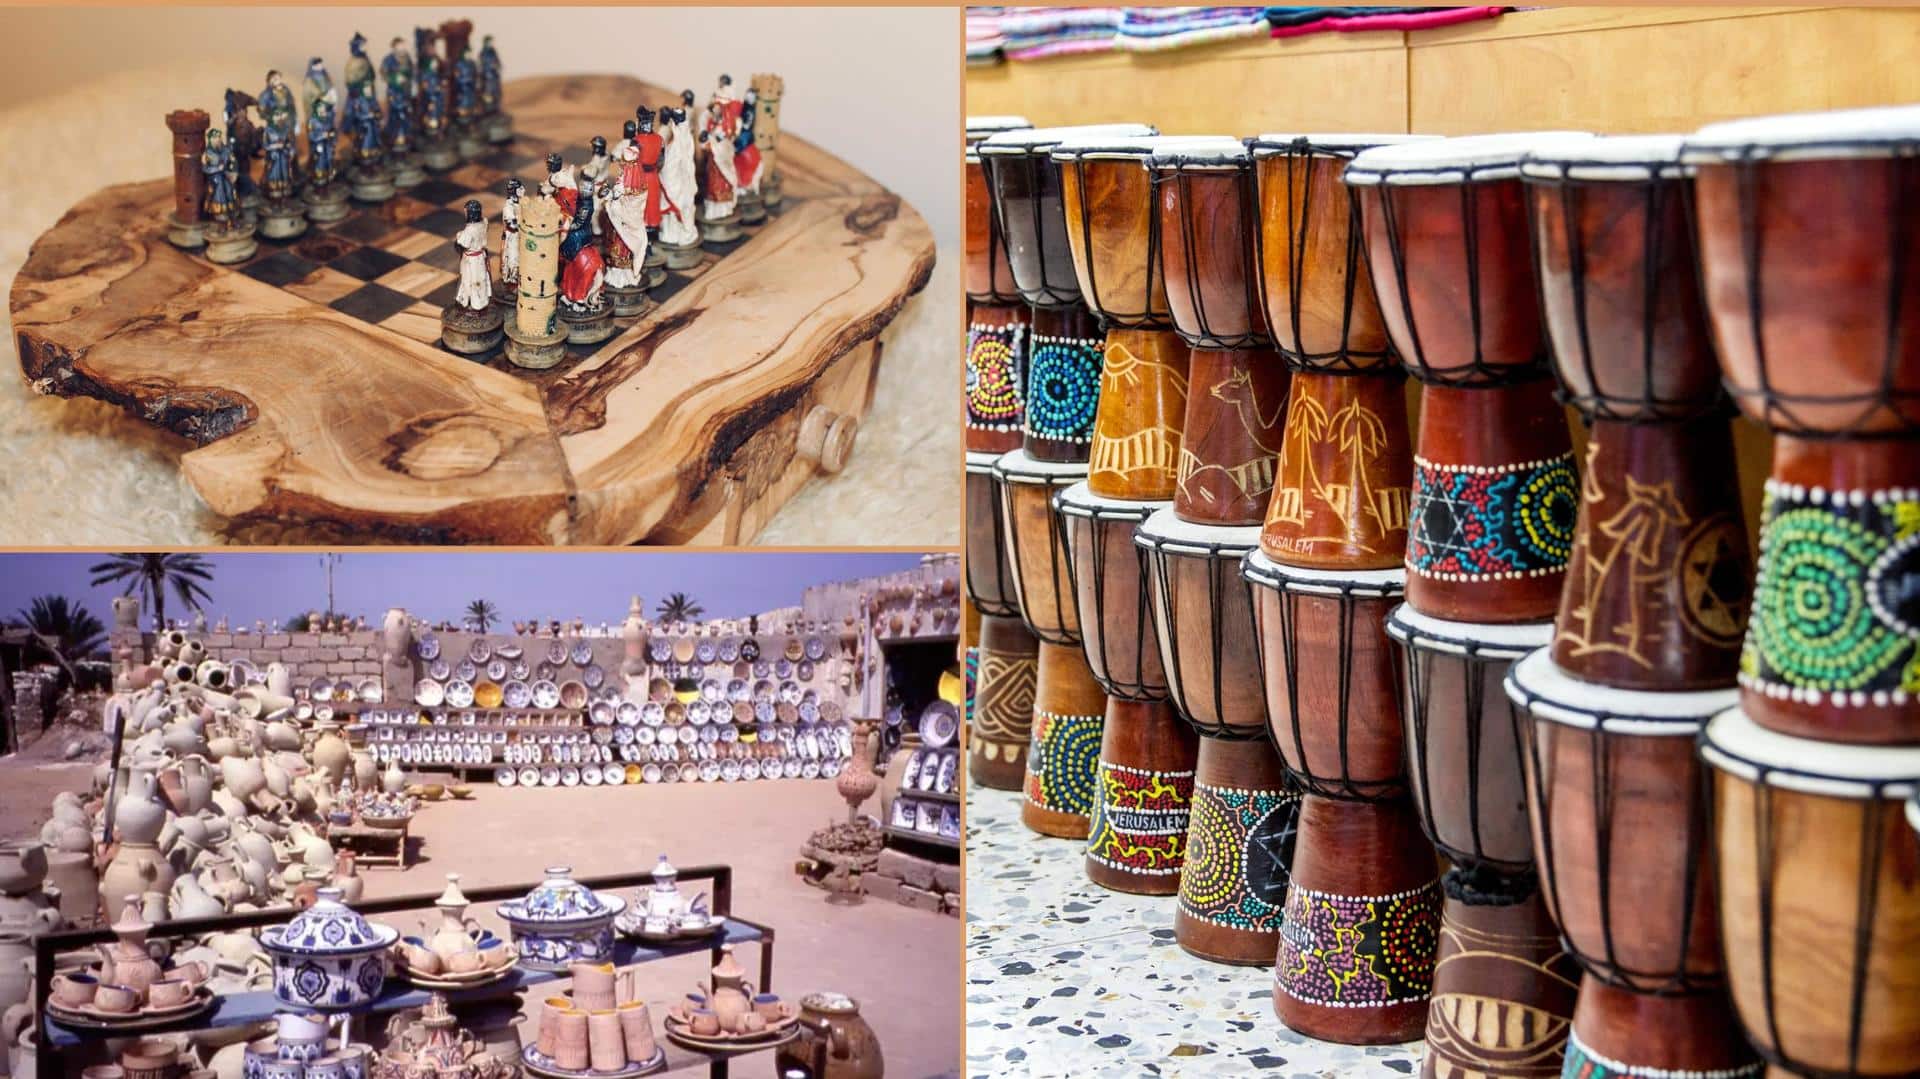 Traveling to Tunisia? Don't forget to shop for these souvenirs